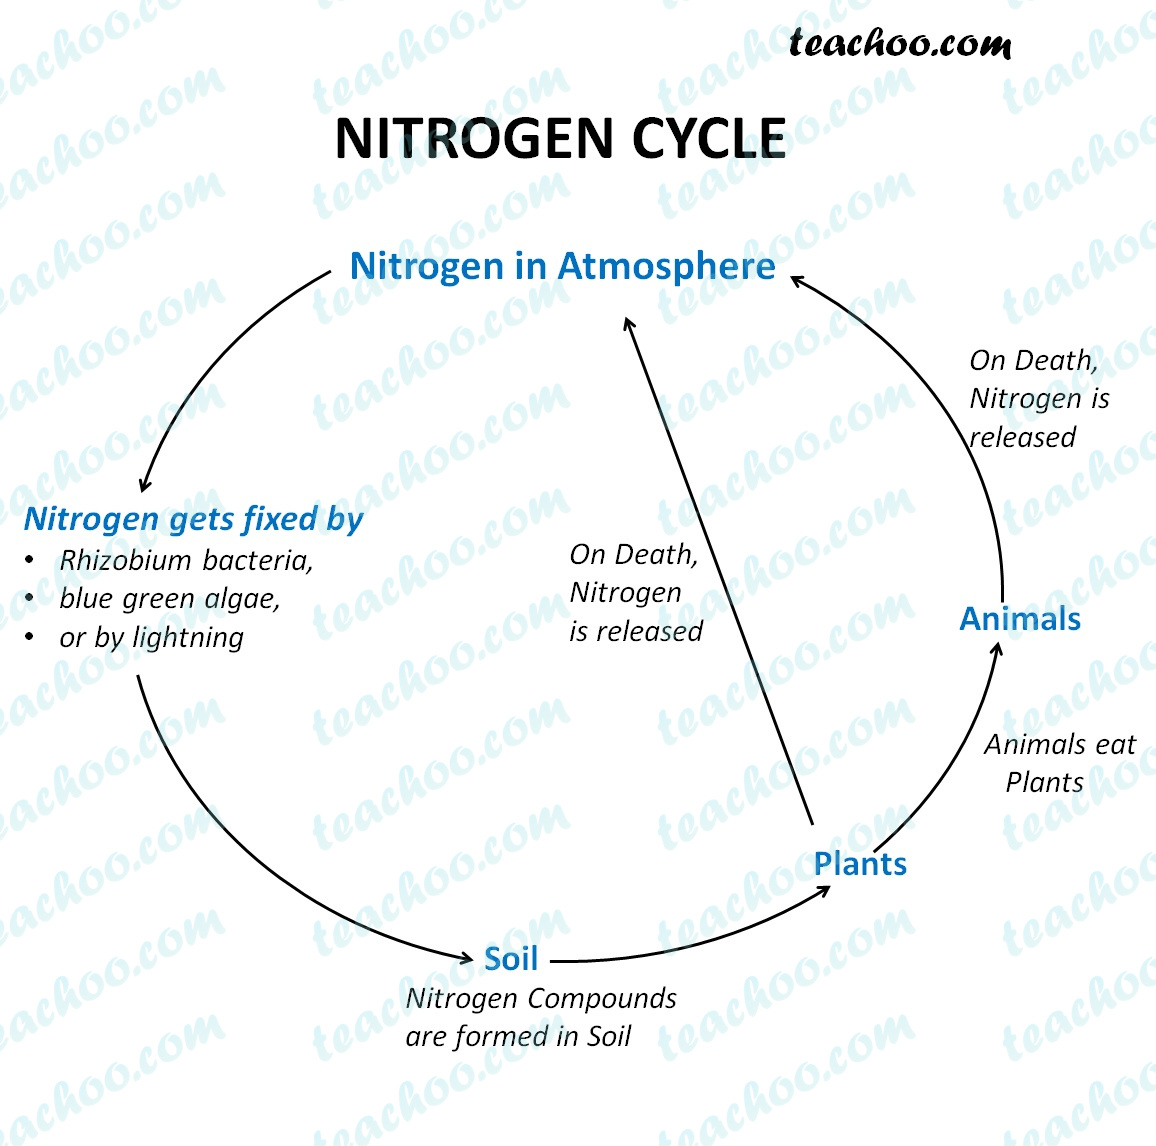 Nitrogen Cycle - Diagram with Steps Explained - Teachoo - Concepts